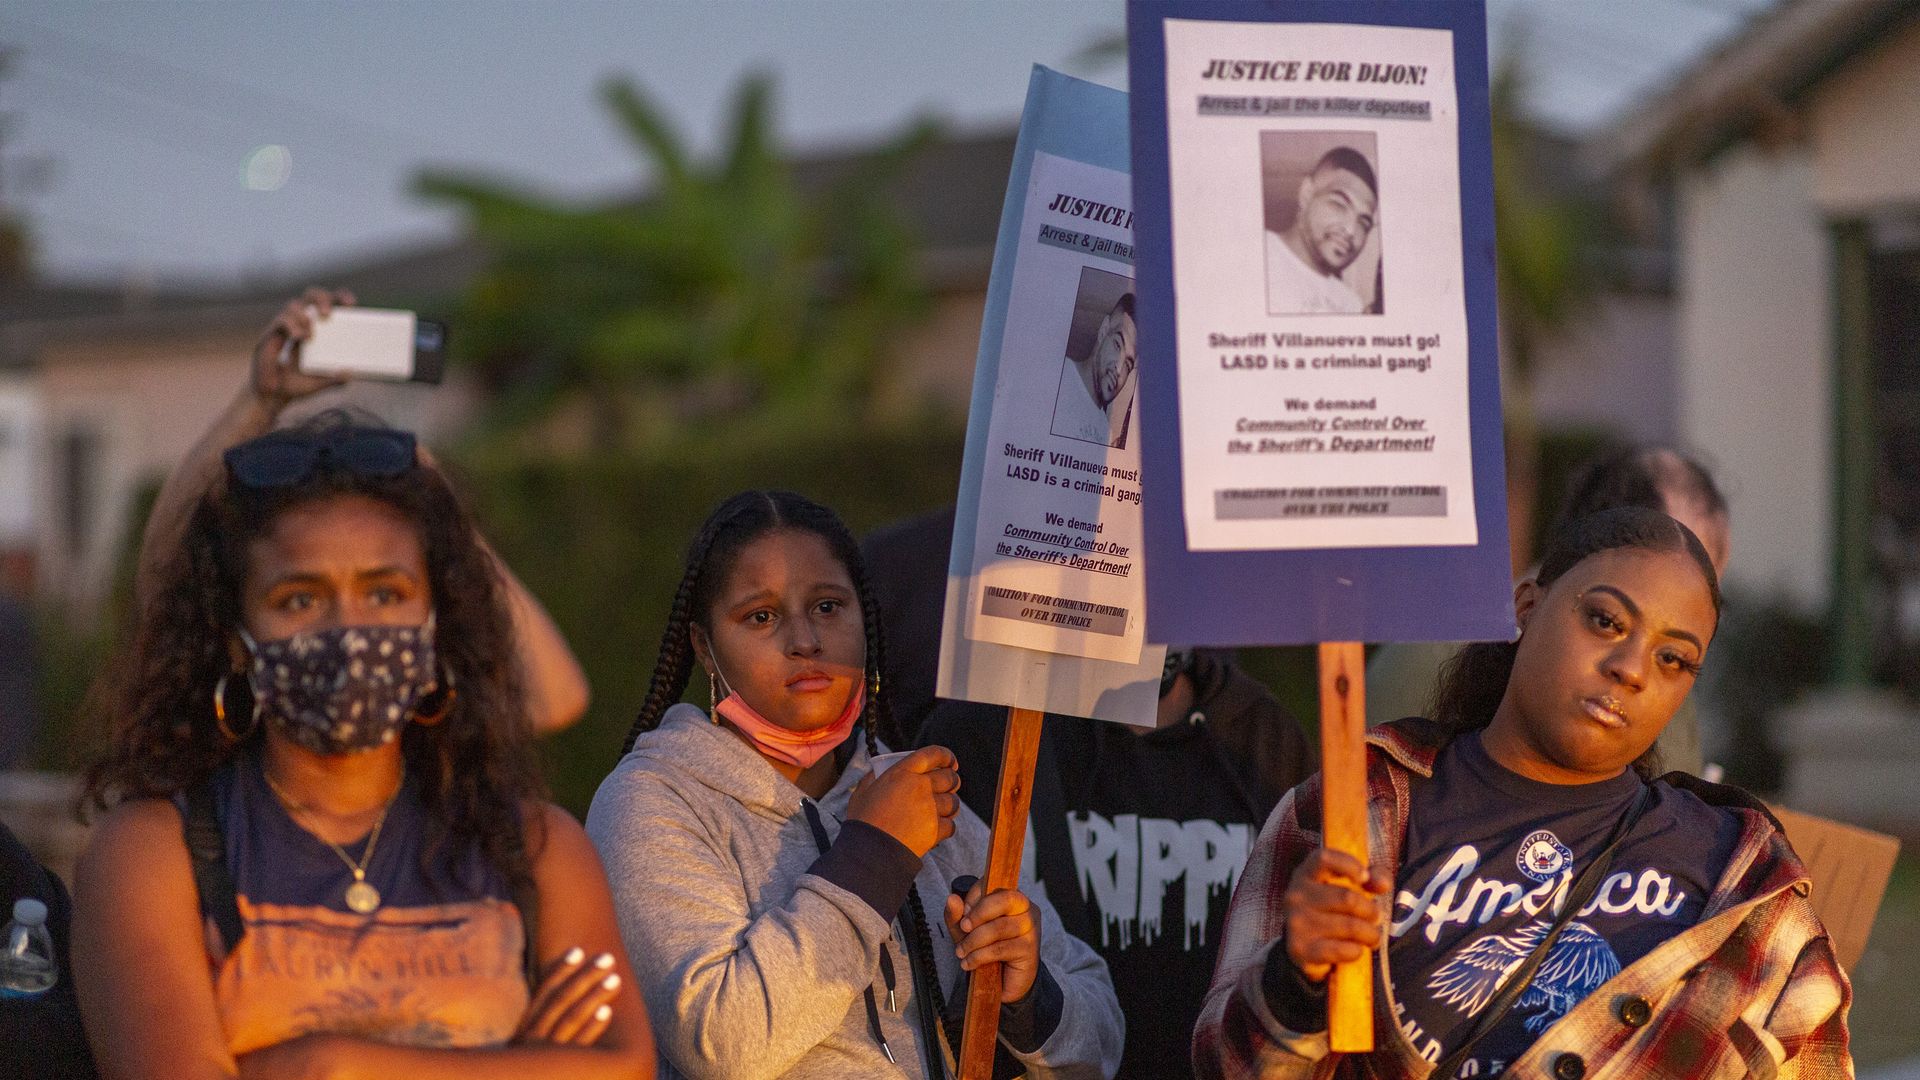 Protesters demonstrate follwing the shooting of Dijon Kizzee by Los Angeles Sheriff's deputies in South Los Angeles.